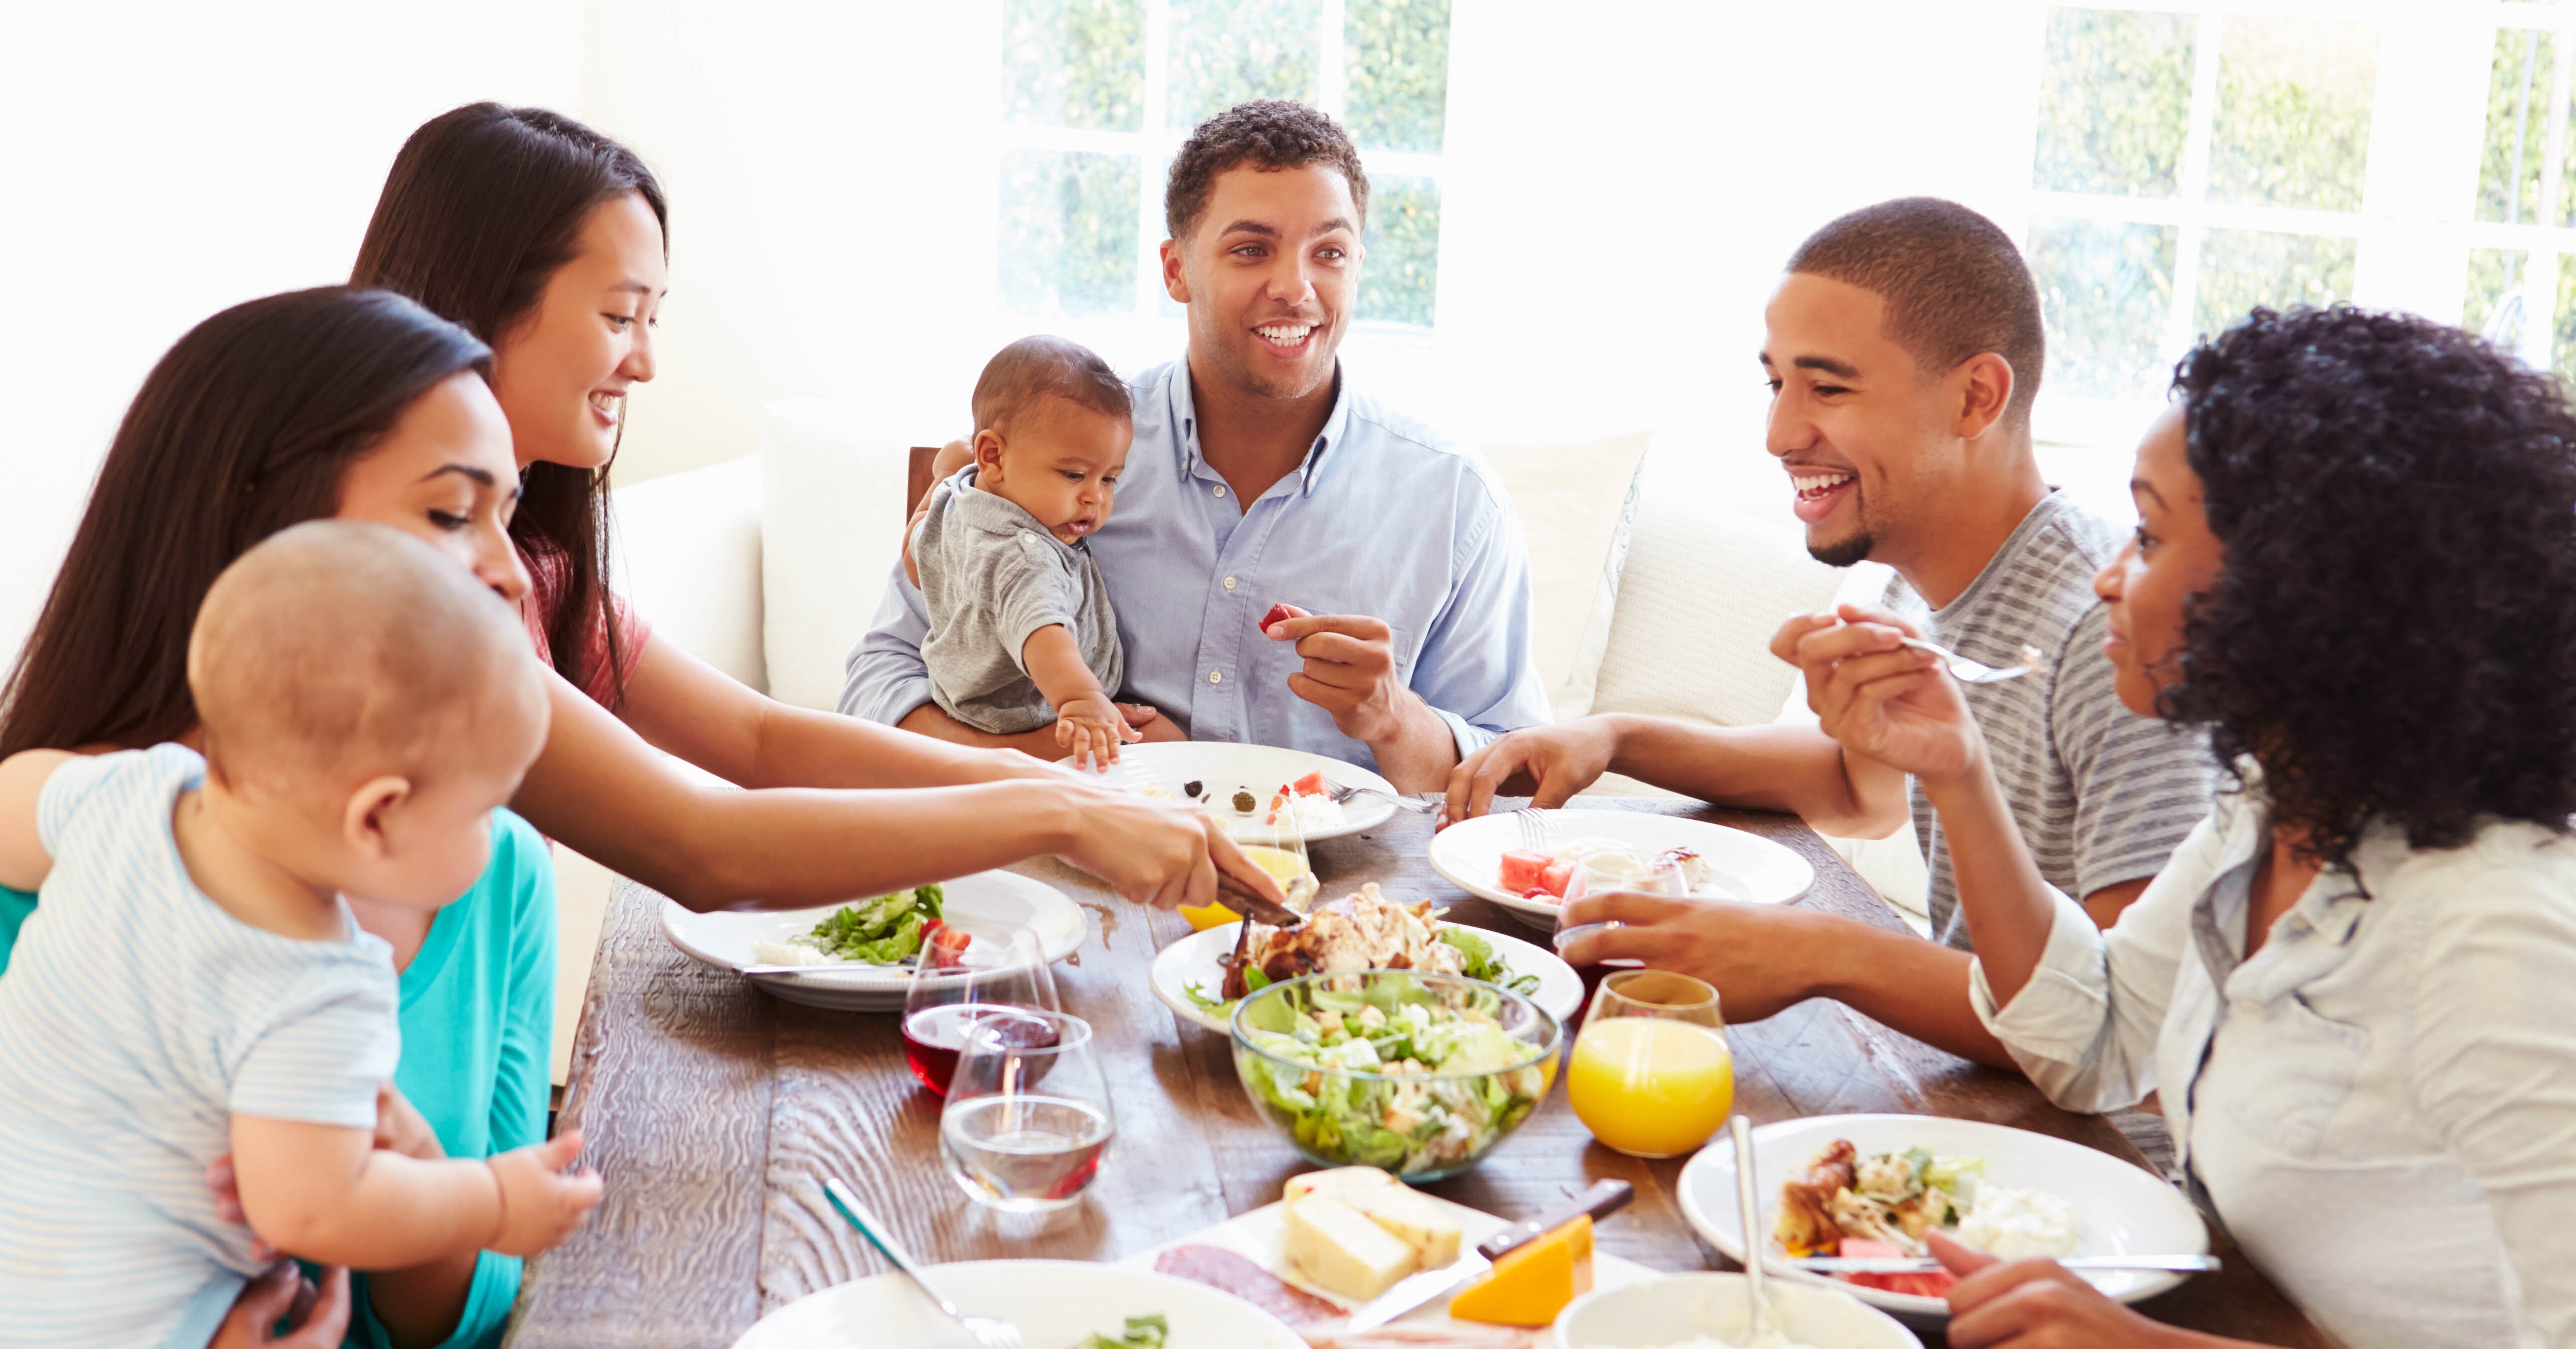 Learn About Family Meal Budgeting with These Tips